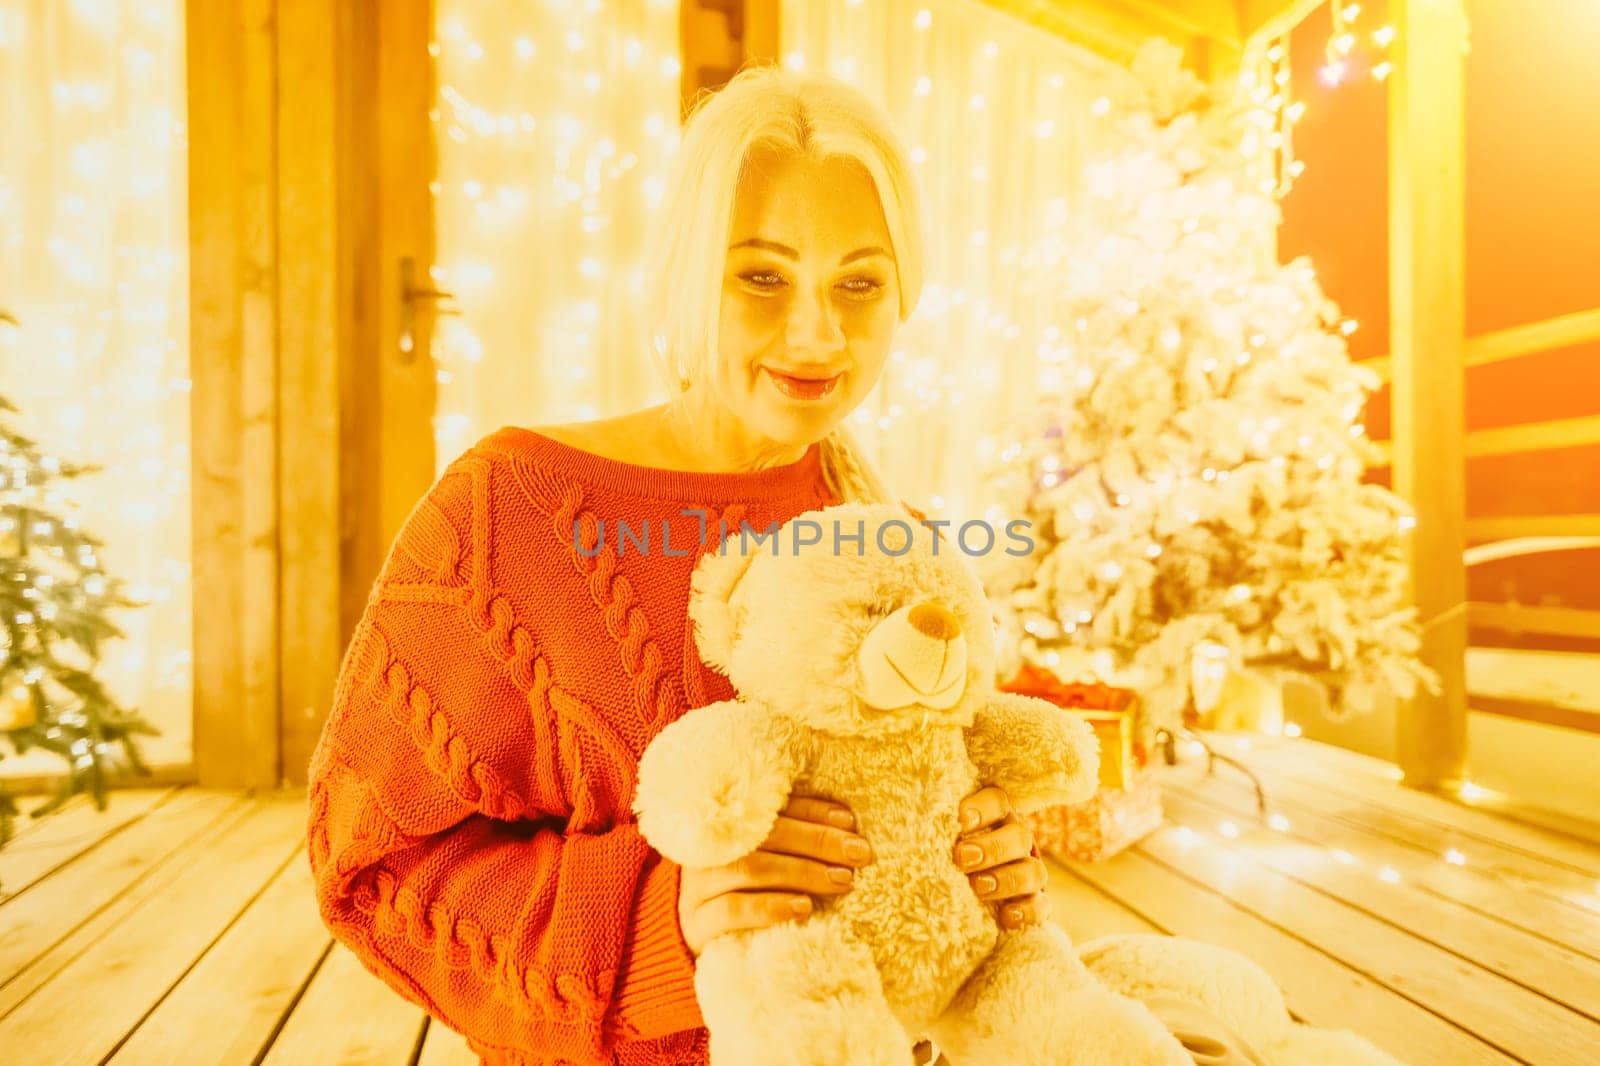 Woman in a red sweater and holding teddy bear in front of Christmas tree. Christmas holidays, celebration, family.